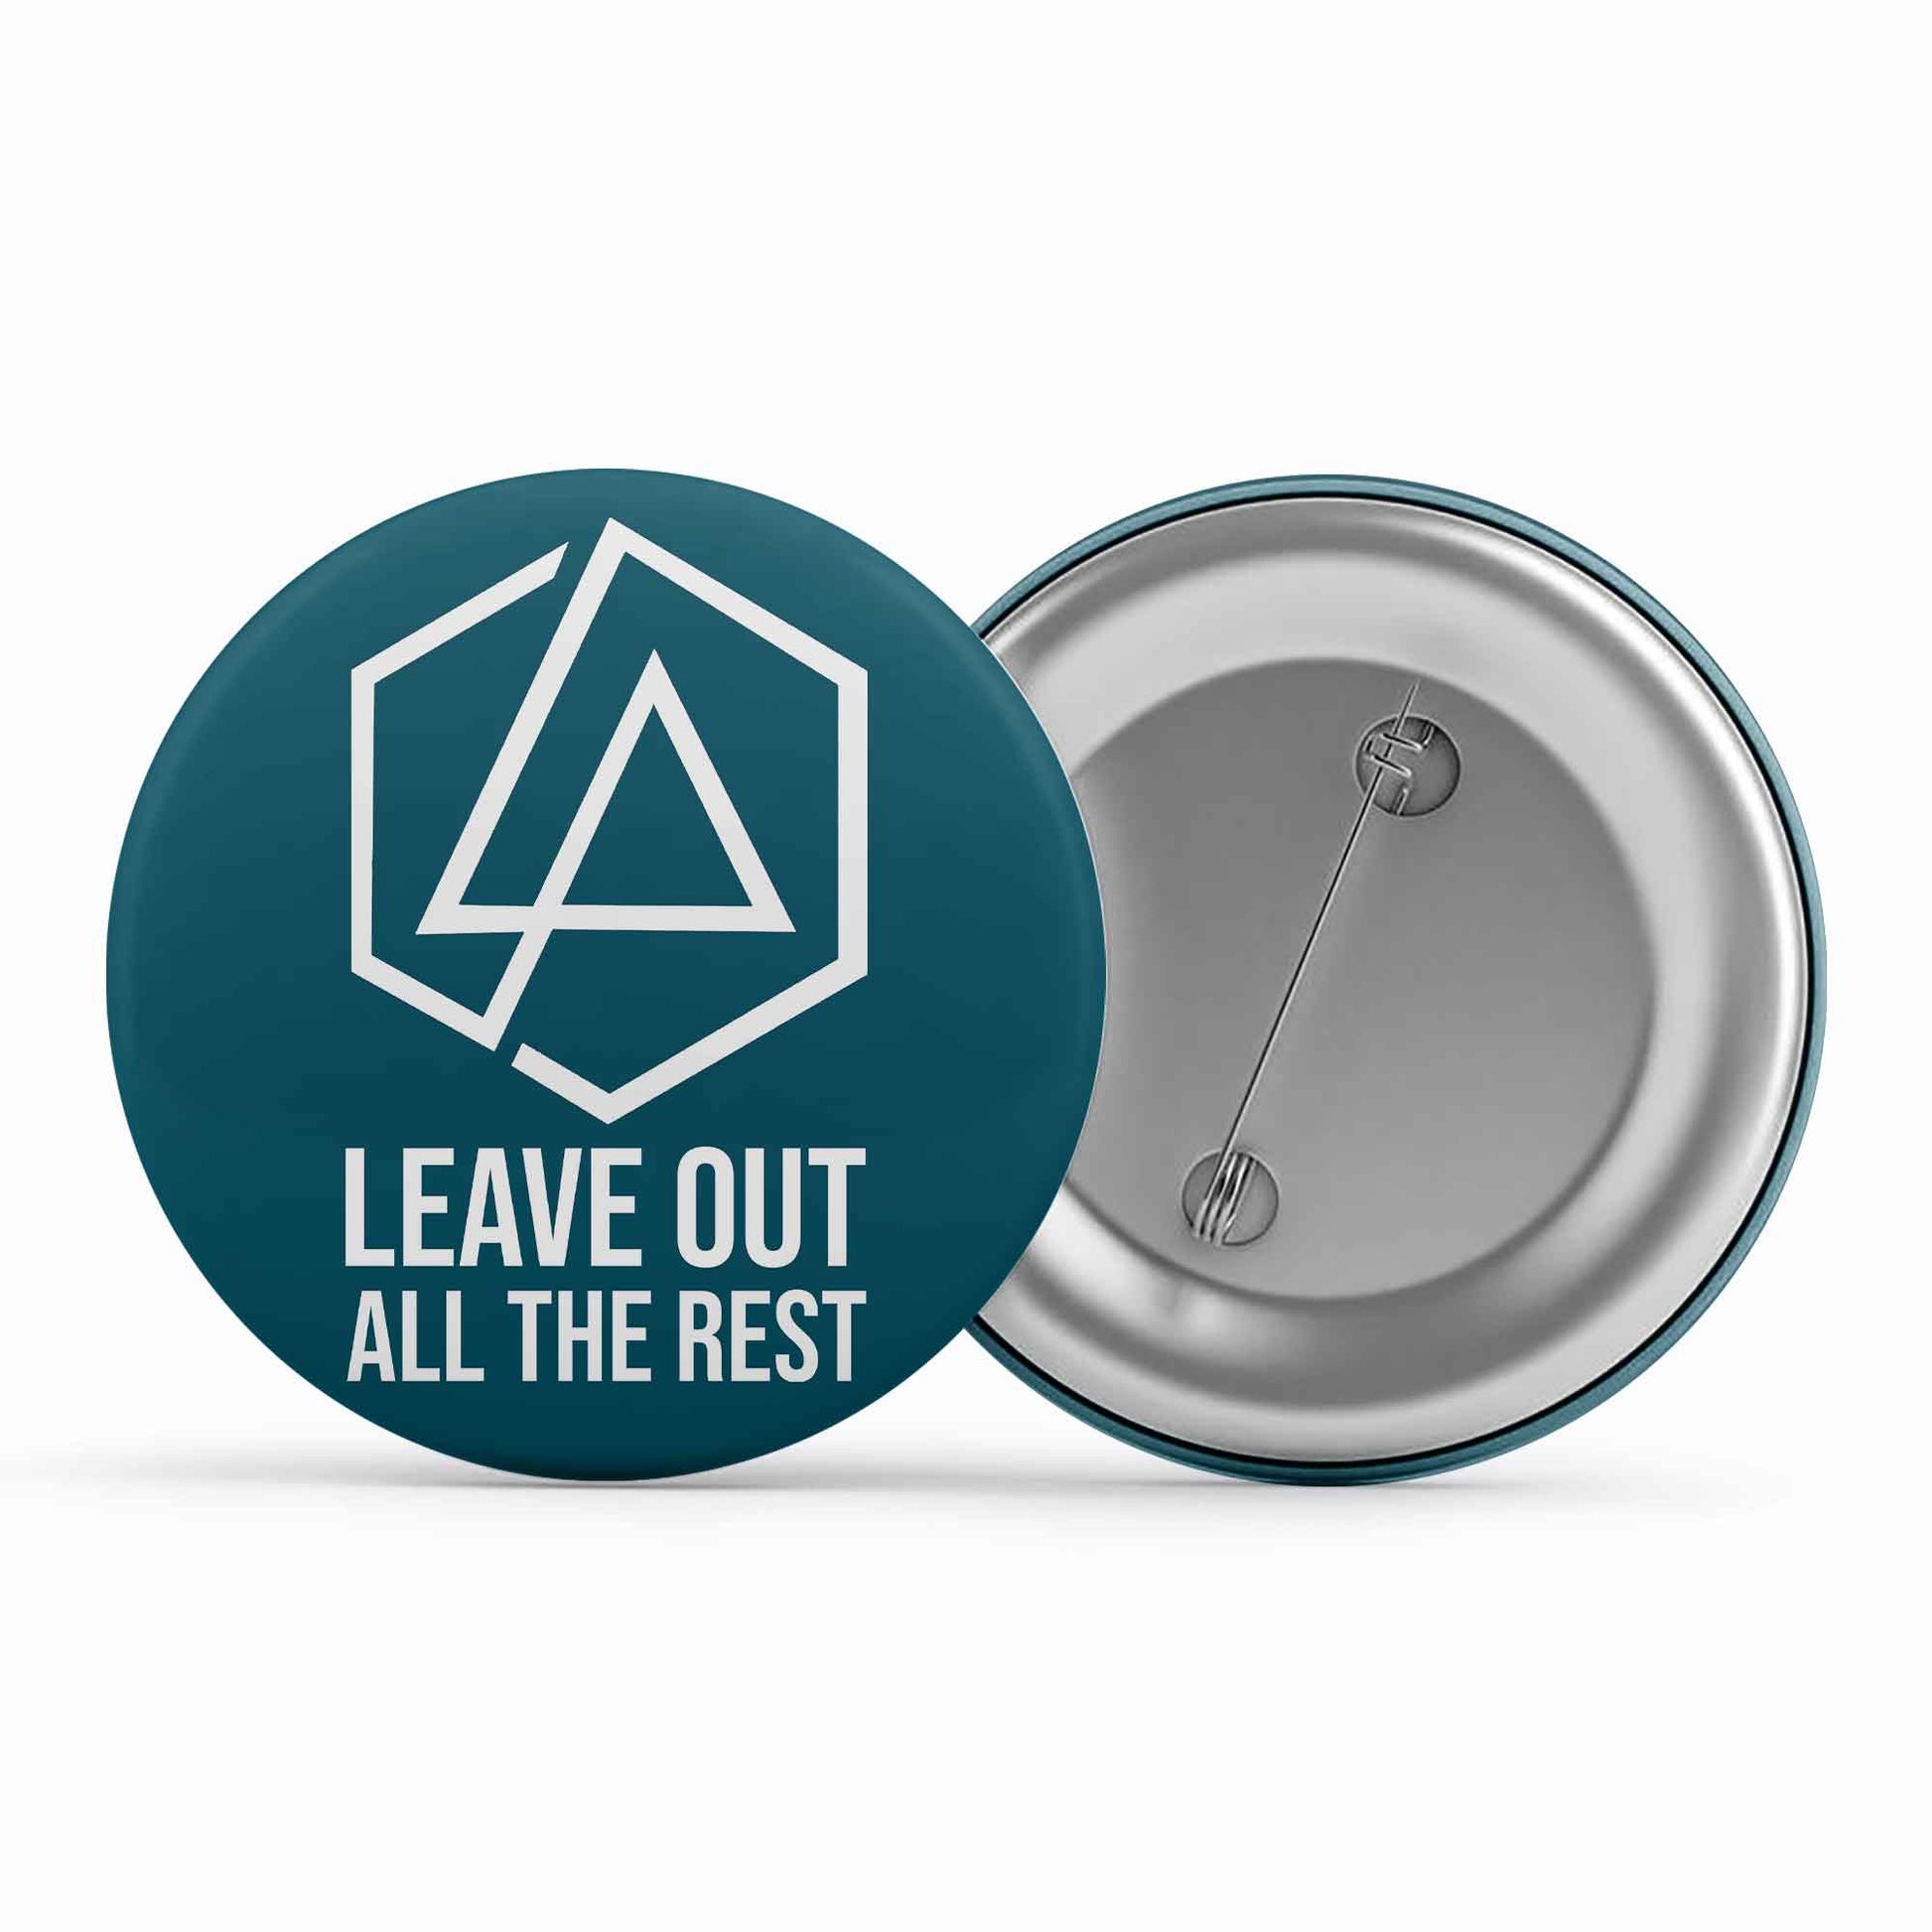 linkin park leave out all the rest badge pin button music band buy online united states of america usa the banyan tee tbt men women girls boys unisex